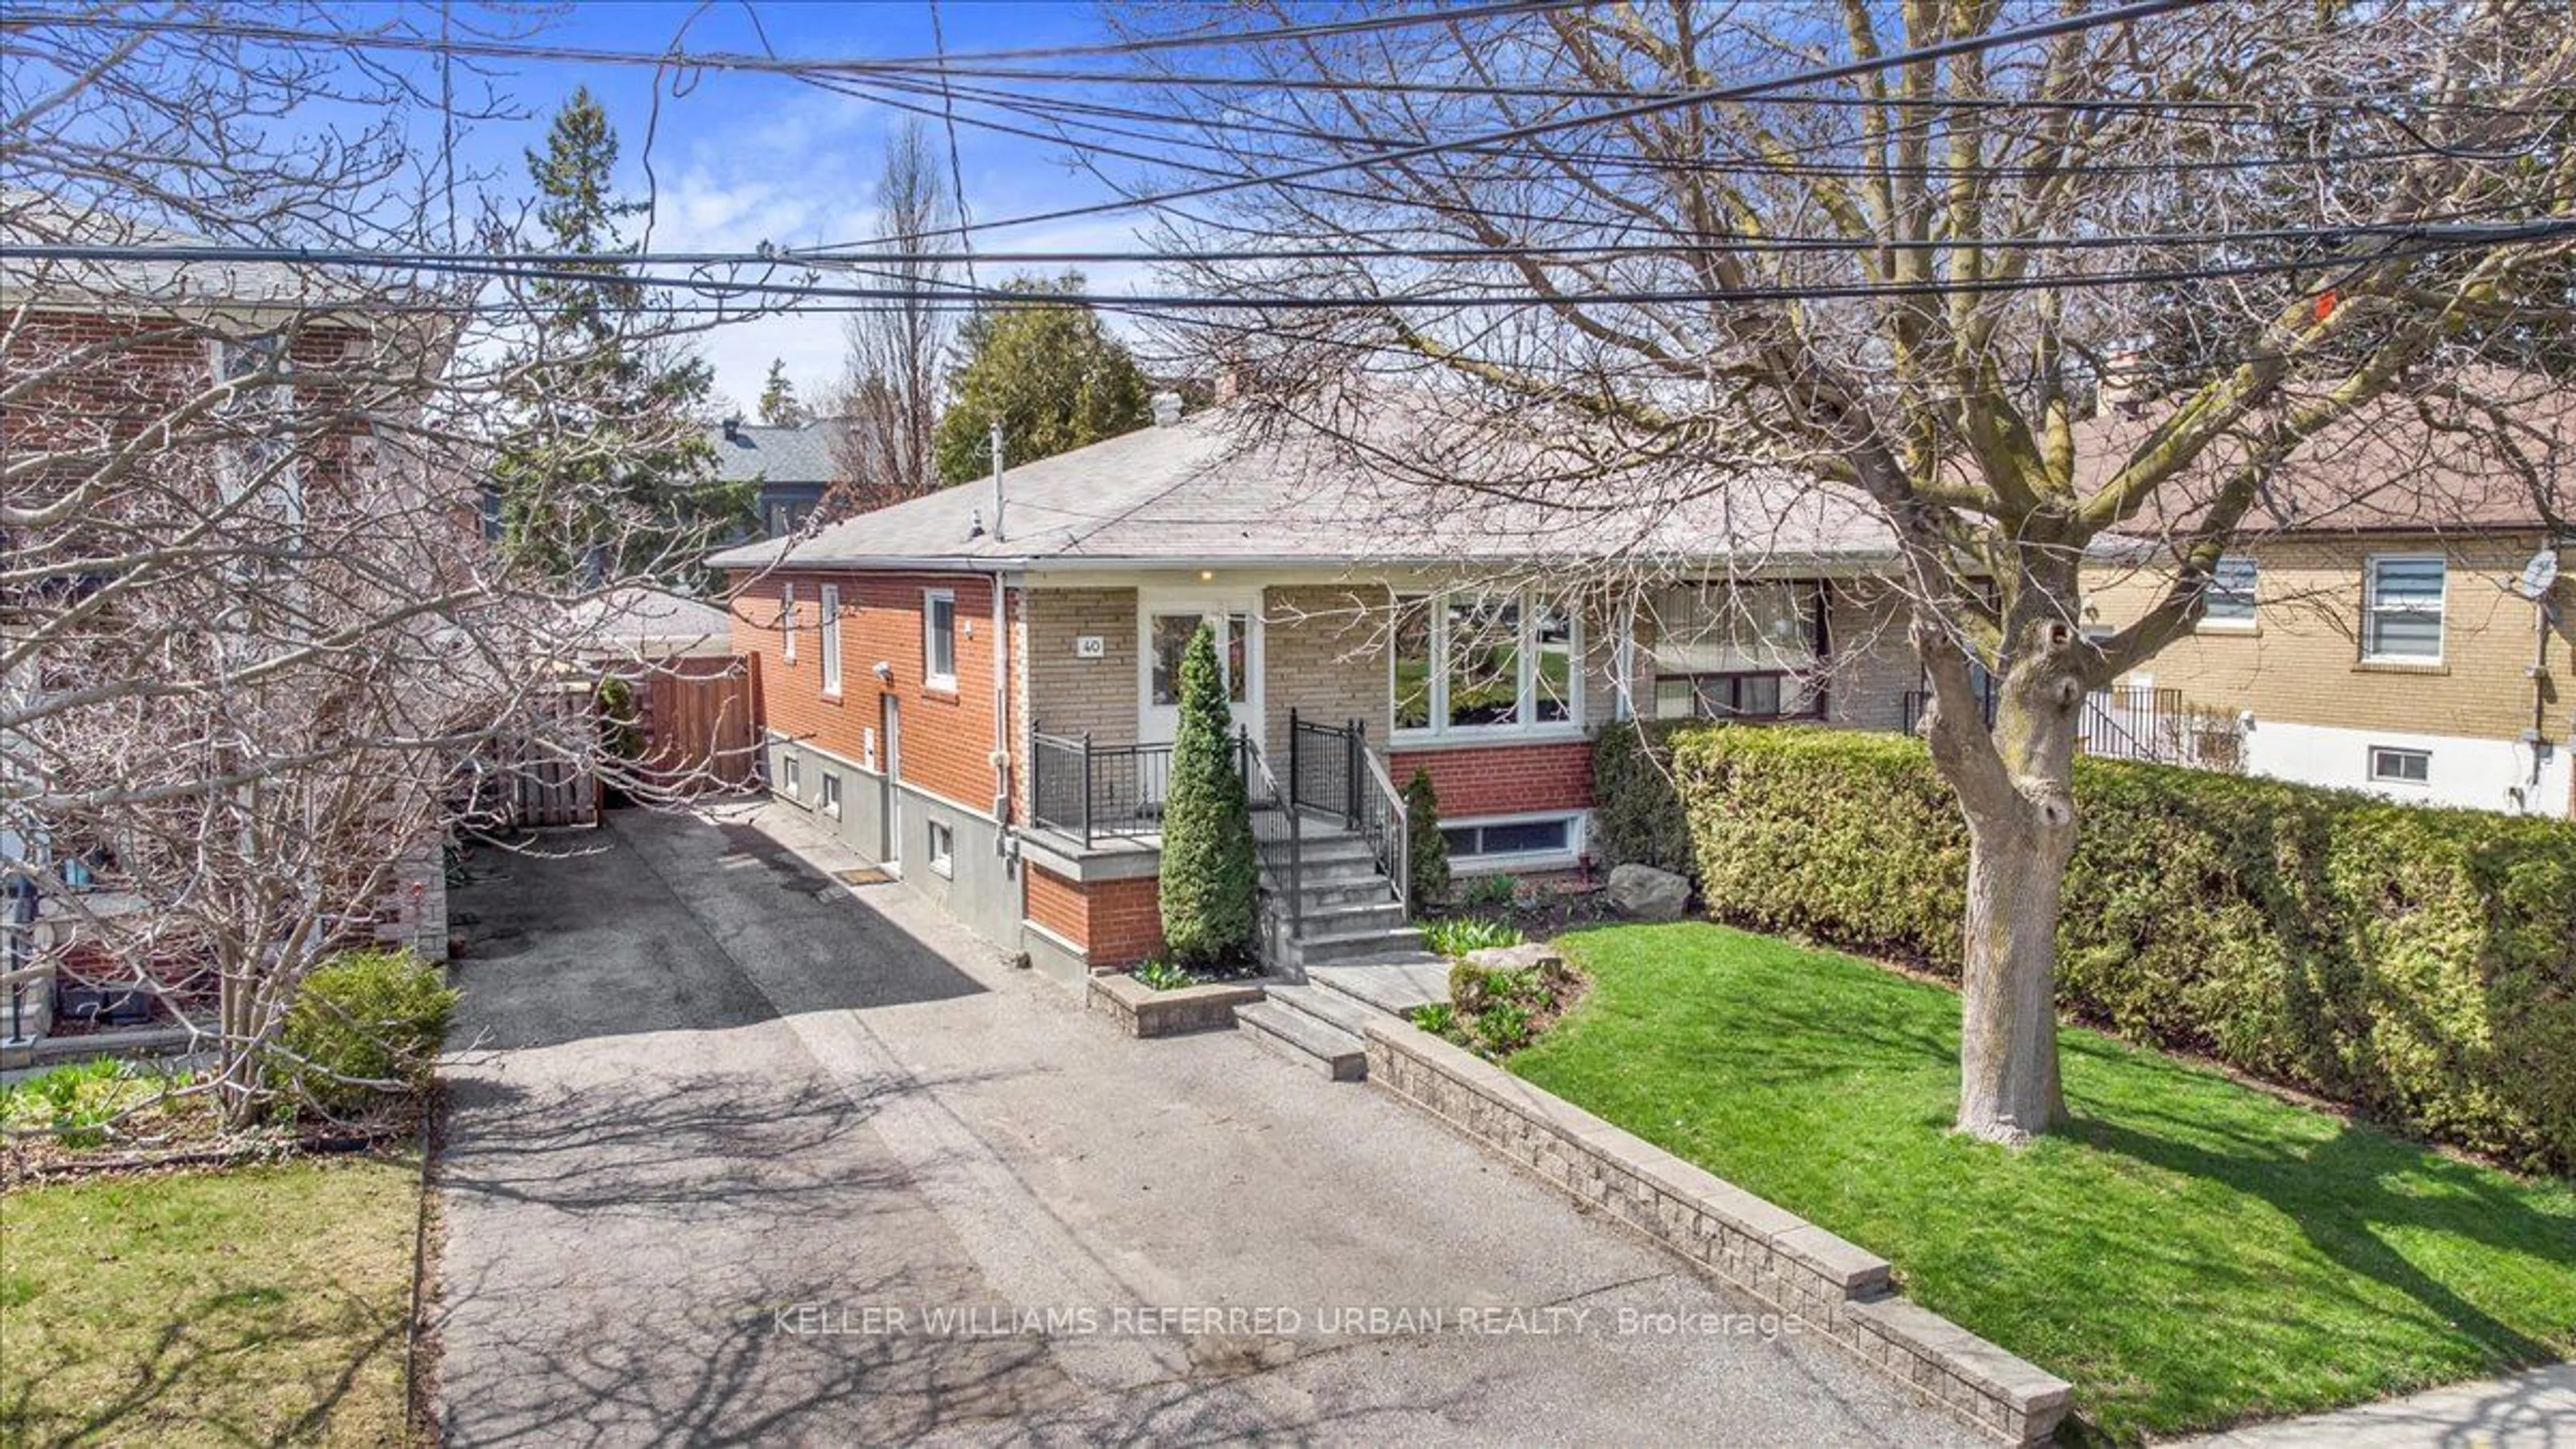 Frontside or backside of a home for 40 Linelle St, Toronto Ontario M2N 2J3